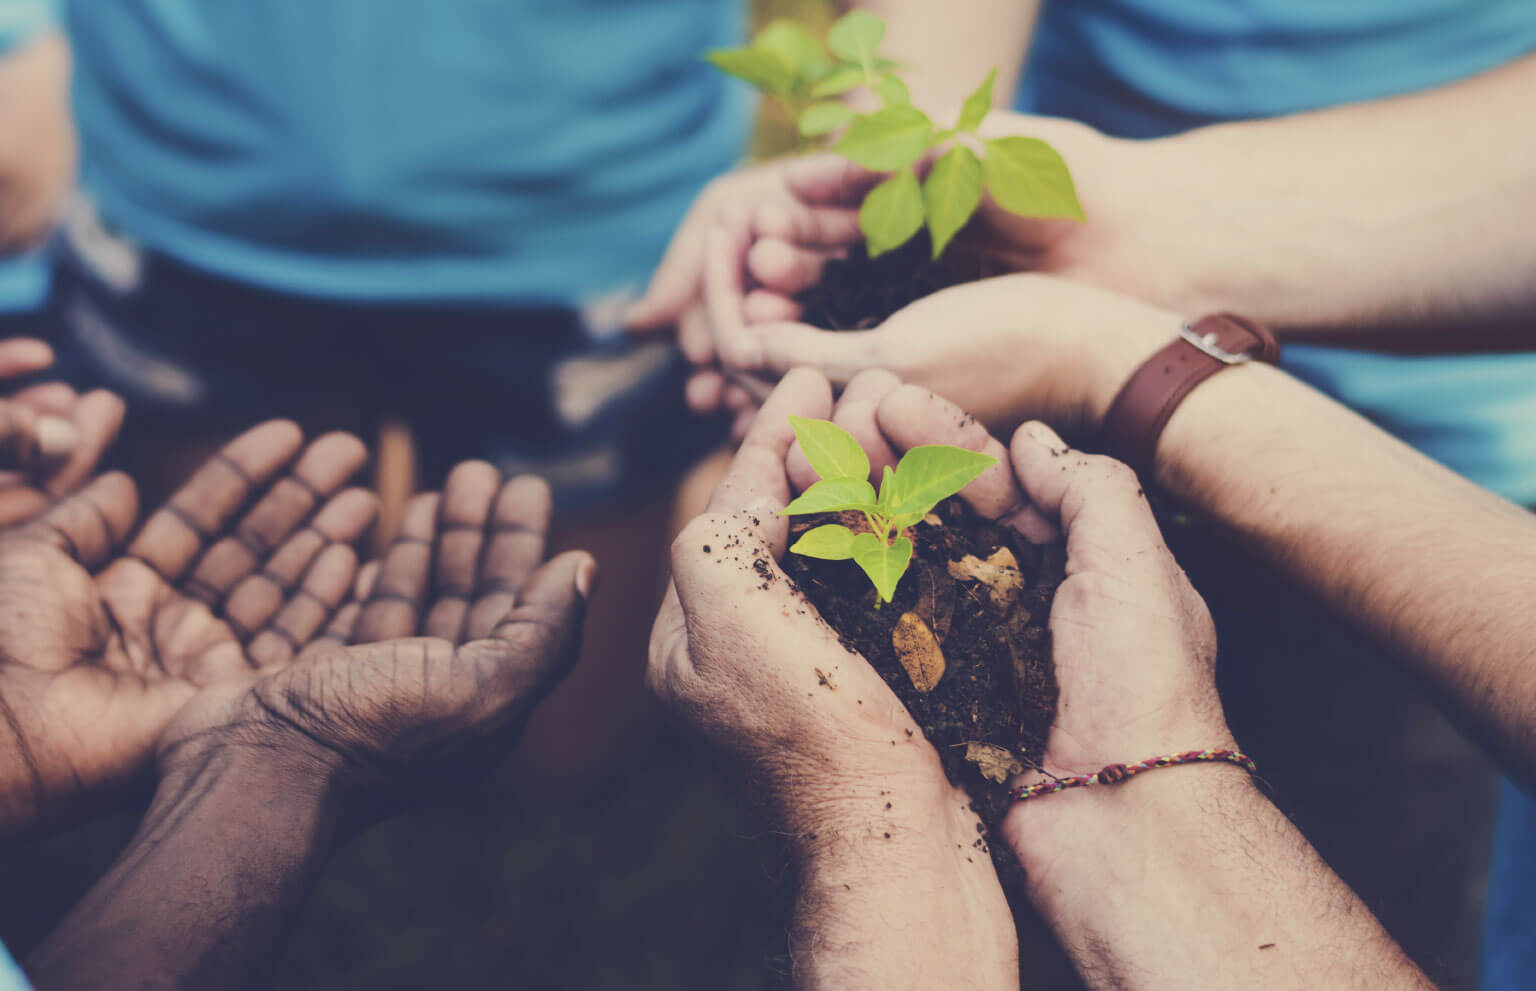 Hands of people holding a plant with dirt